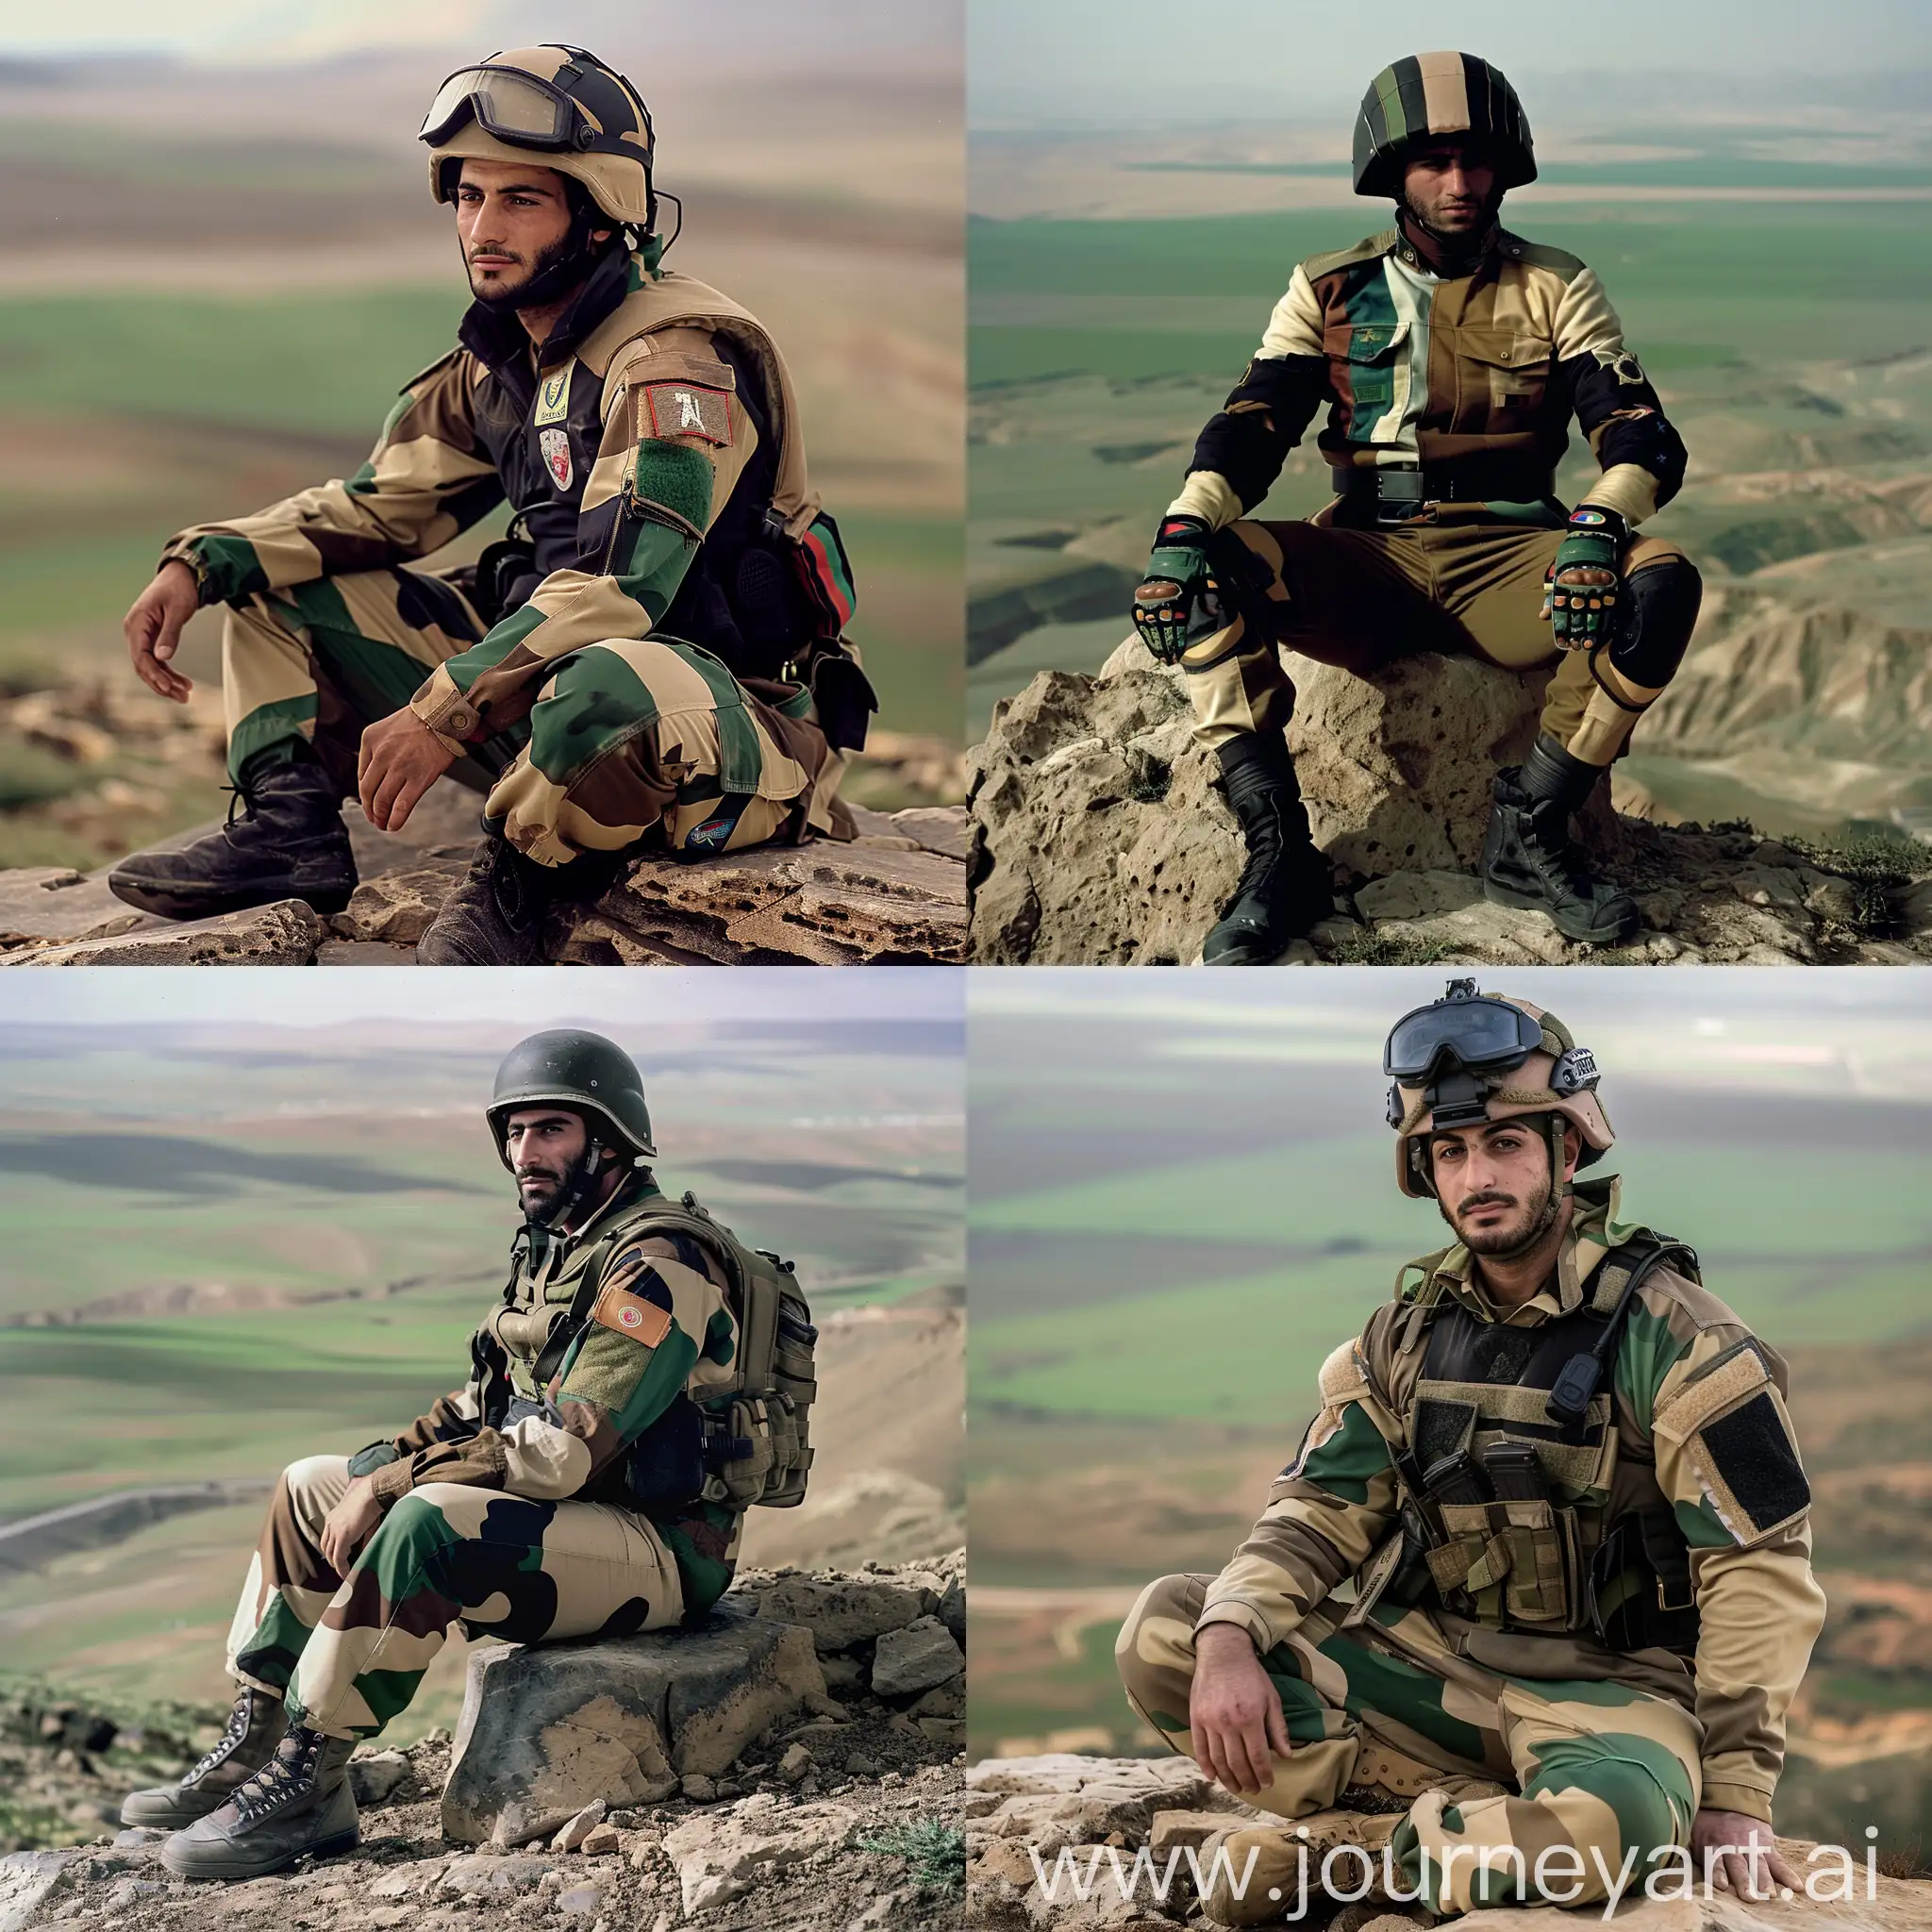 A Jazbullah soldier wearing a four-color military uniform - black, beige, green and brown. He wears a helmet on his head. He sits on a rock with his thighs together, leaning slightly to the left. In the background is a plain ending with a green mountain
​
